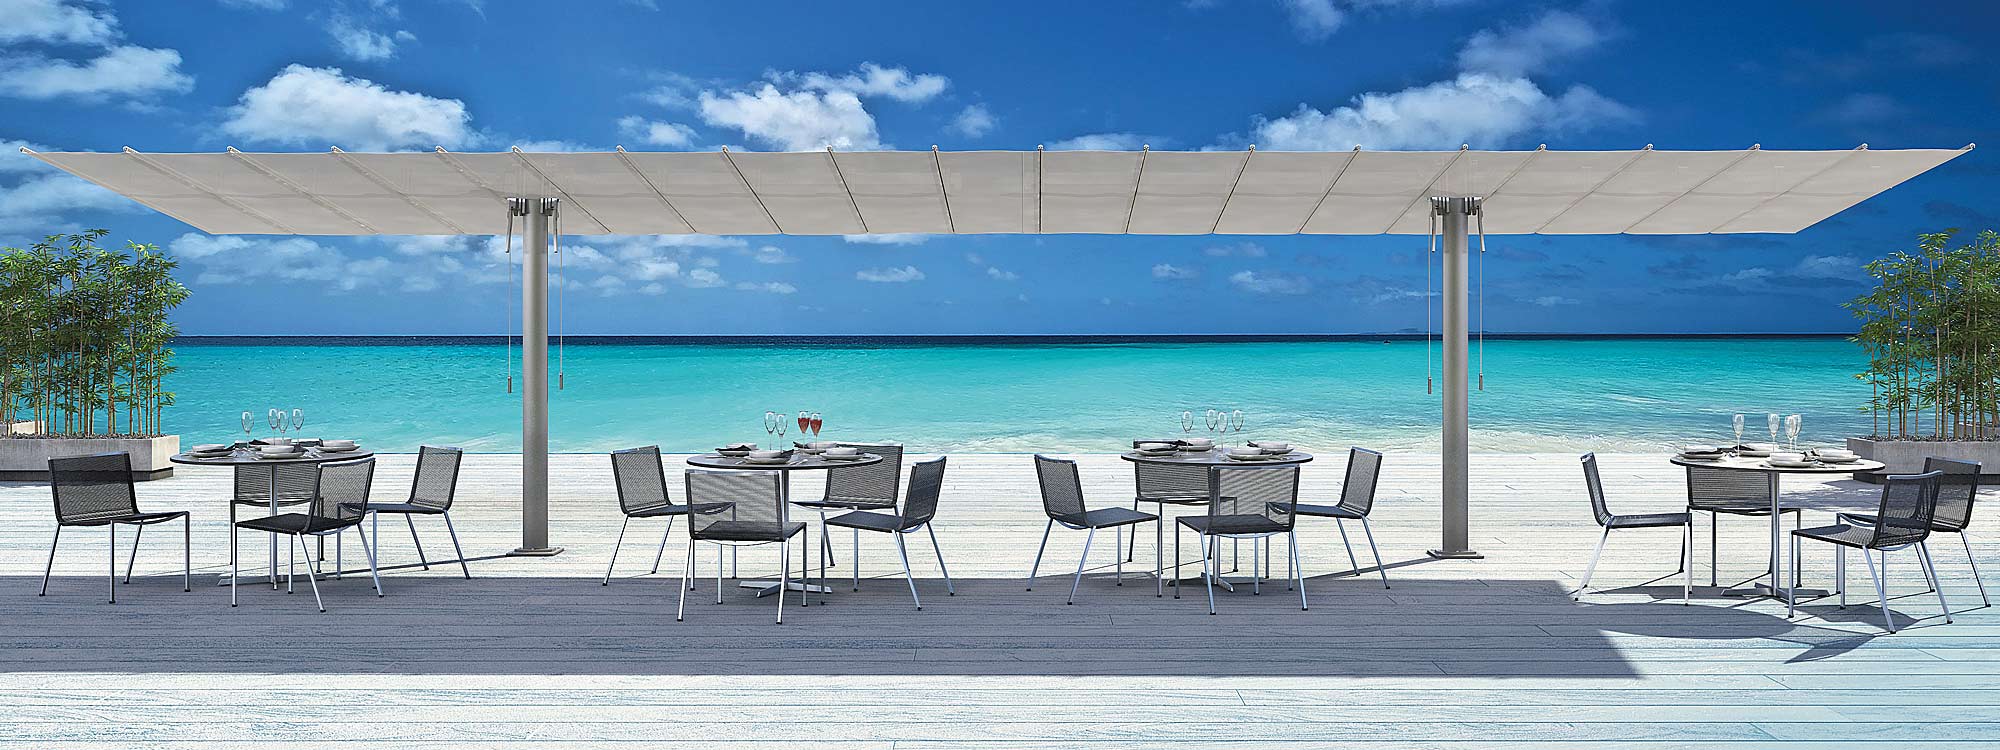 Flexy Twin freestanding sun awning is a twin garden shade in high quality sun canopy materials by FIM modern sun shade company, Italy.